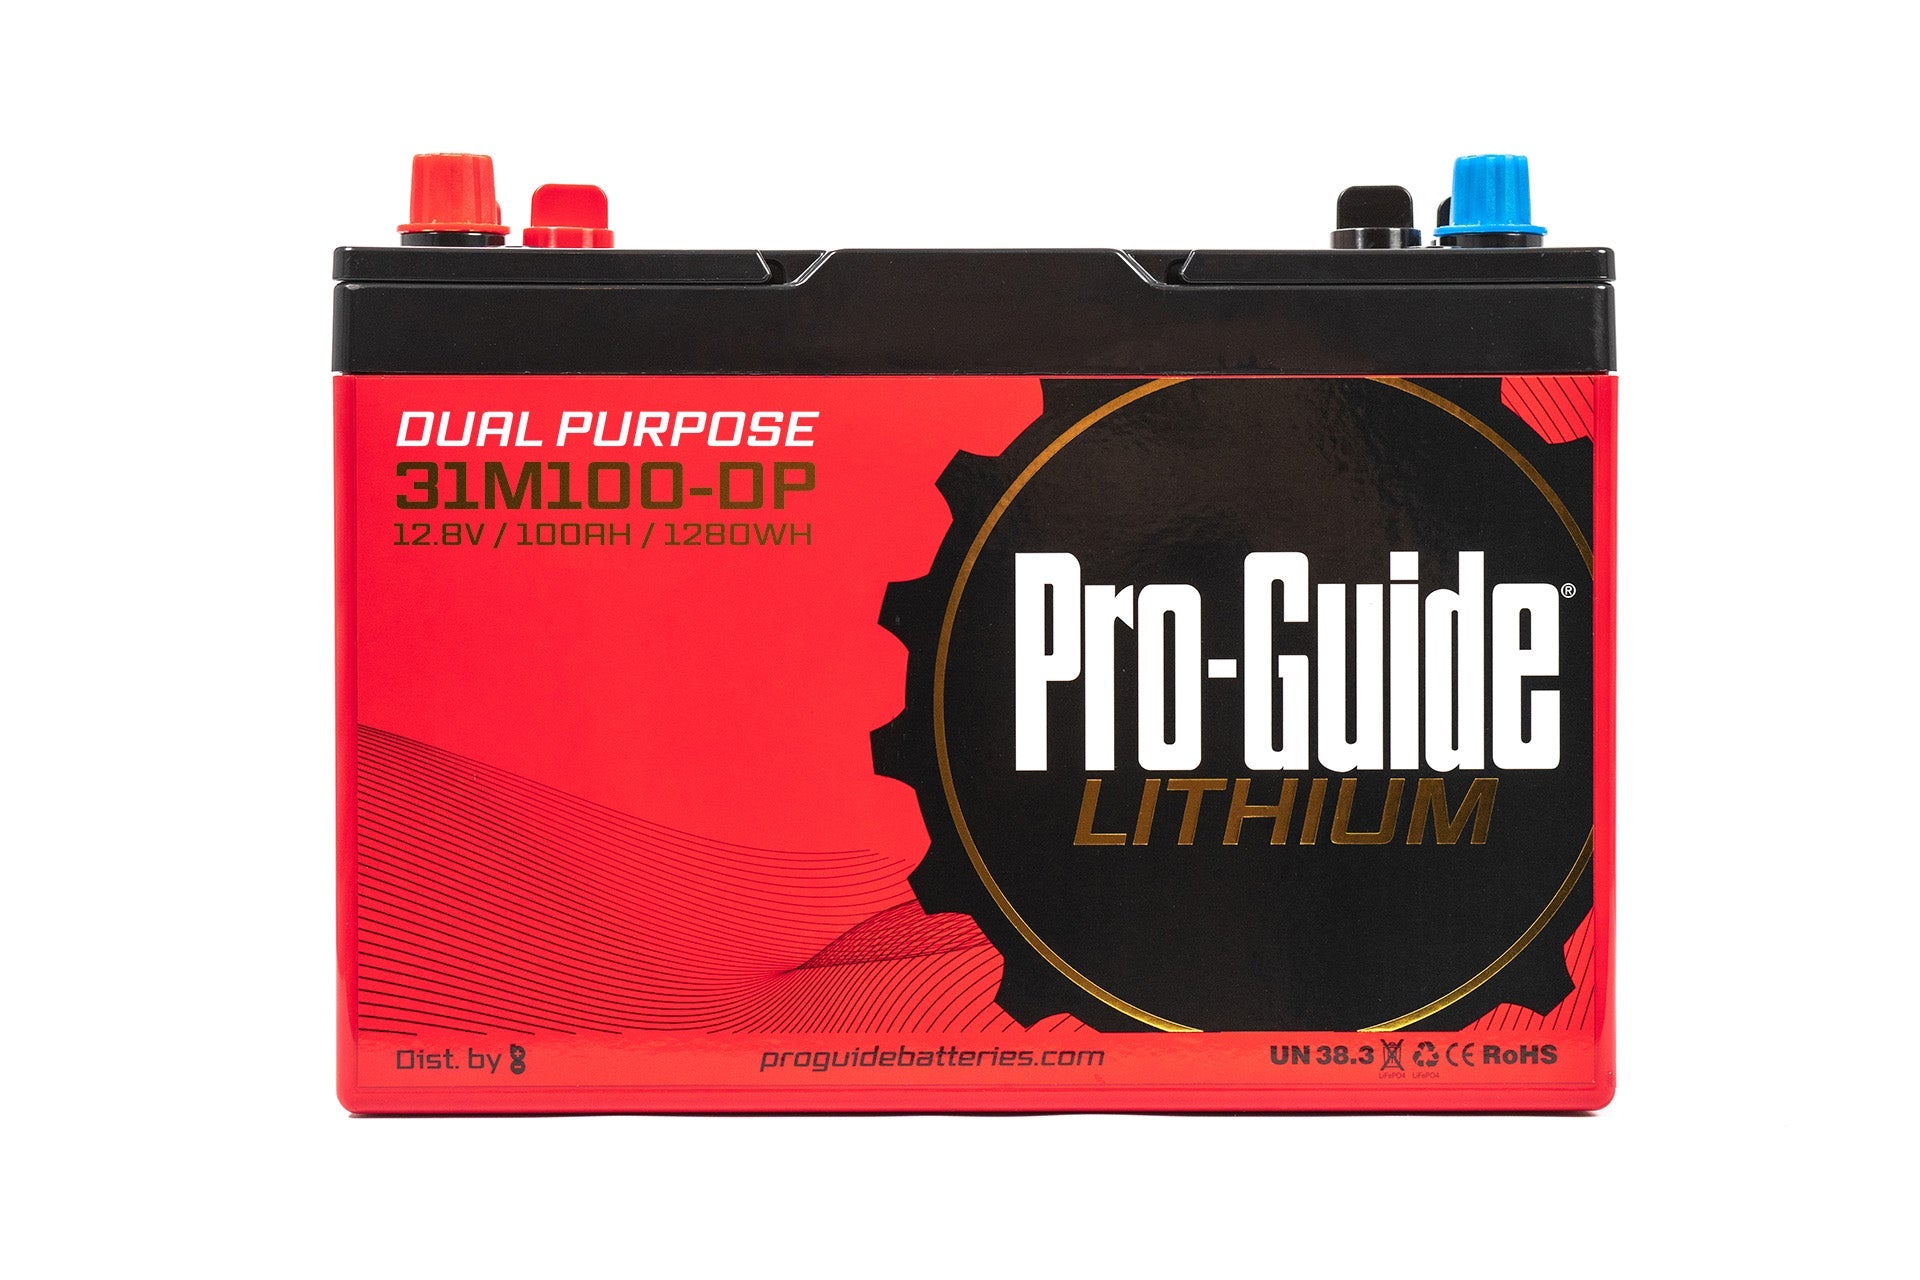 Pro-Guide Lithium // 31M100-DP STARTING BATTERY